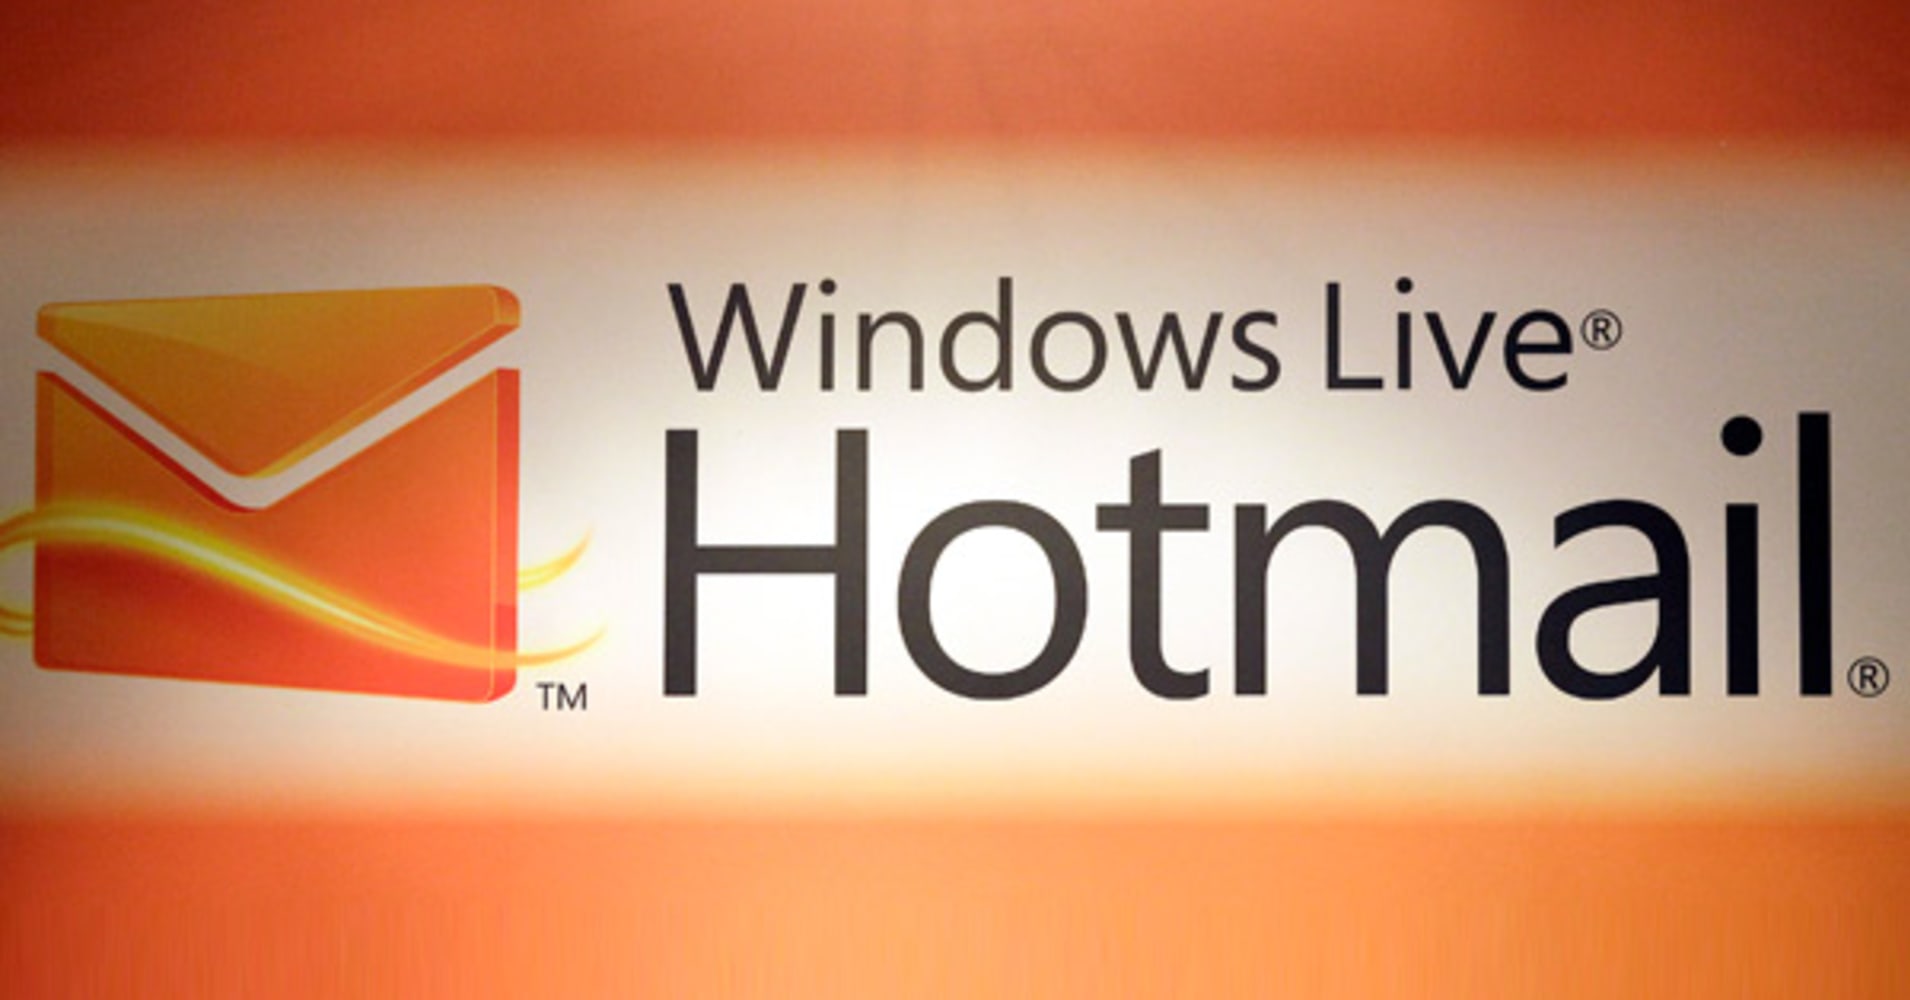 How to Delete Folders in Windows Live Hotmail (Quick Tip)